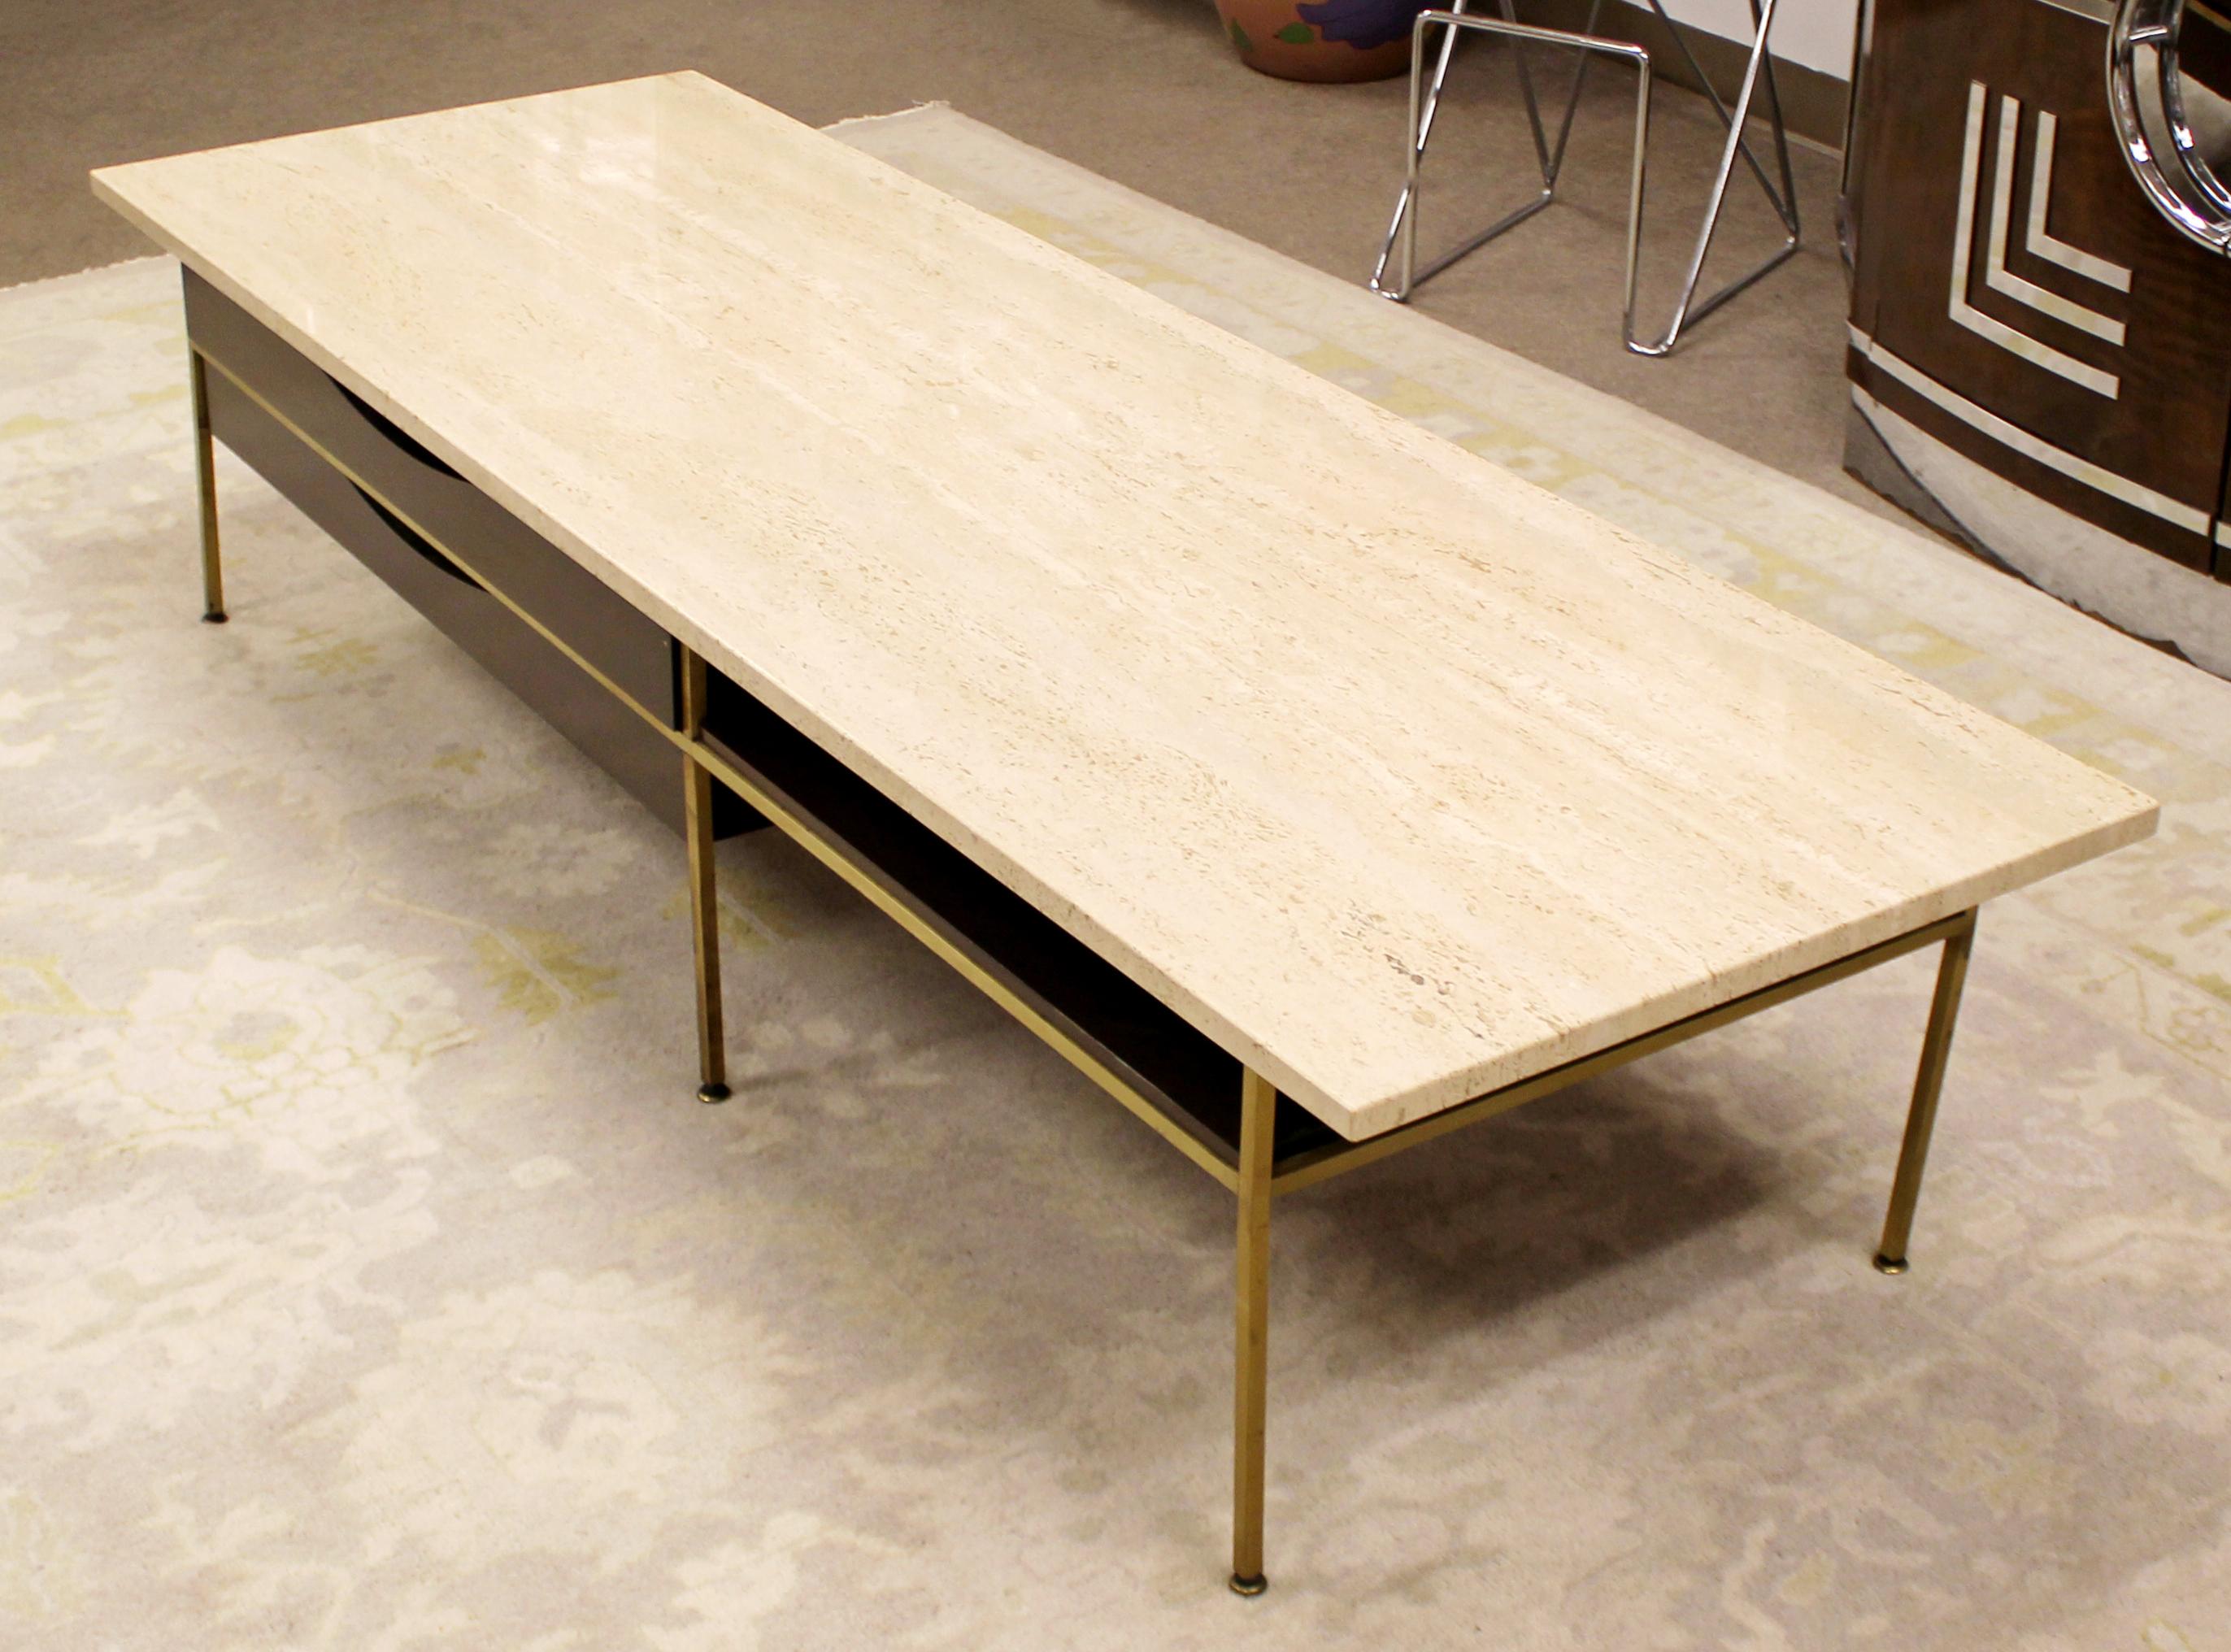 Mid-Century Modern Paul McCobb Travertine Brass Wood Coffee Table 1960s 2 Drawer In Good Condition In Keego Harbor, MI